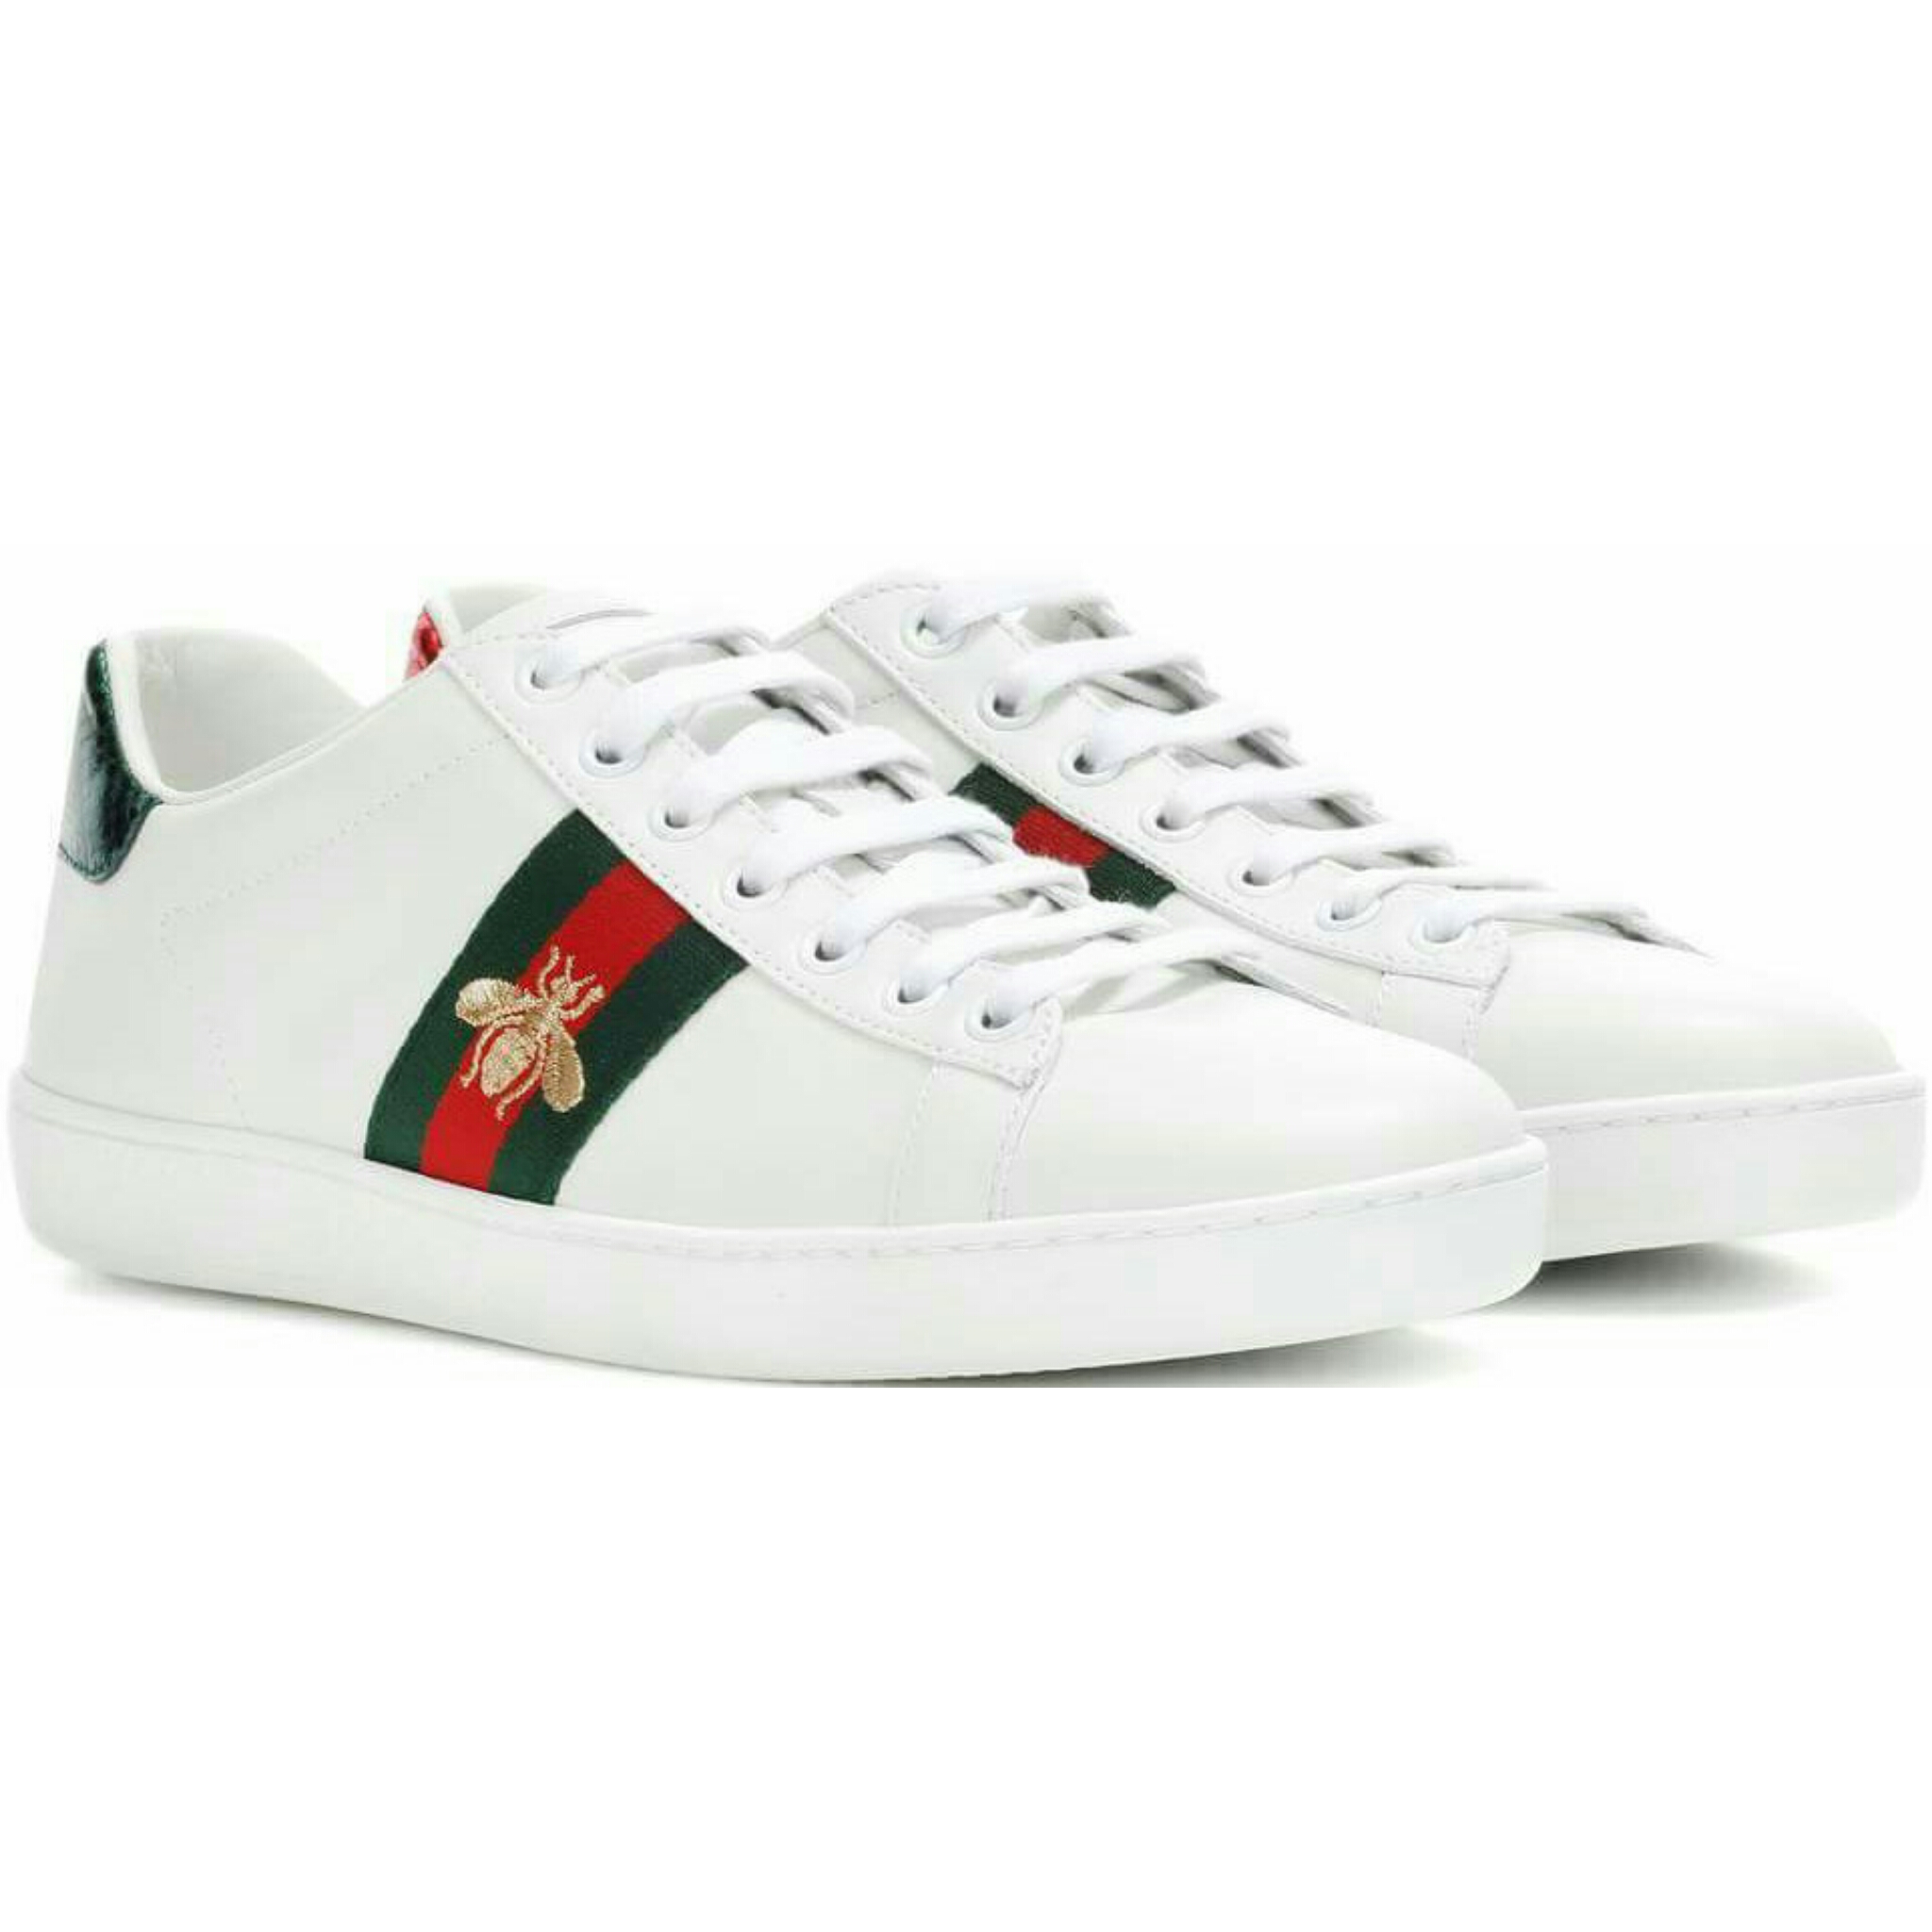 Gucci Ace Bee Sneaker for Men Prices In 